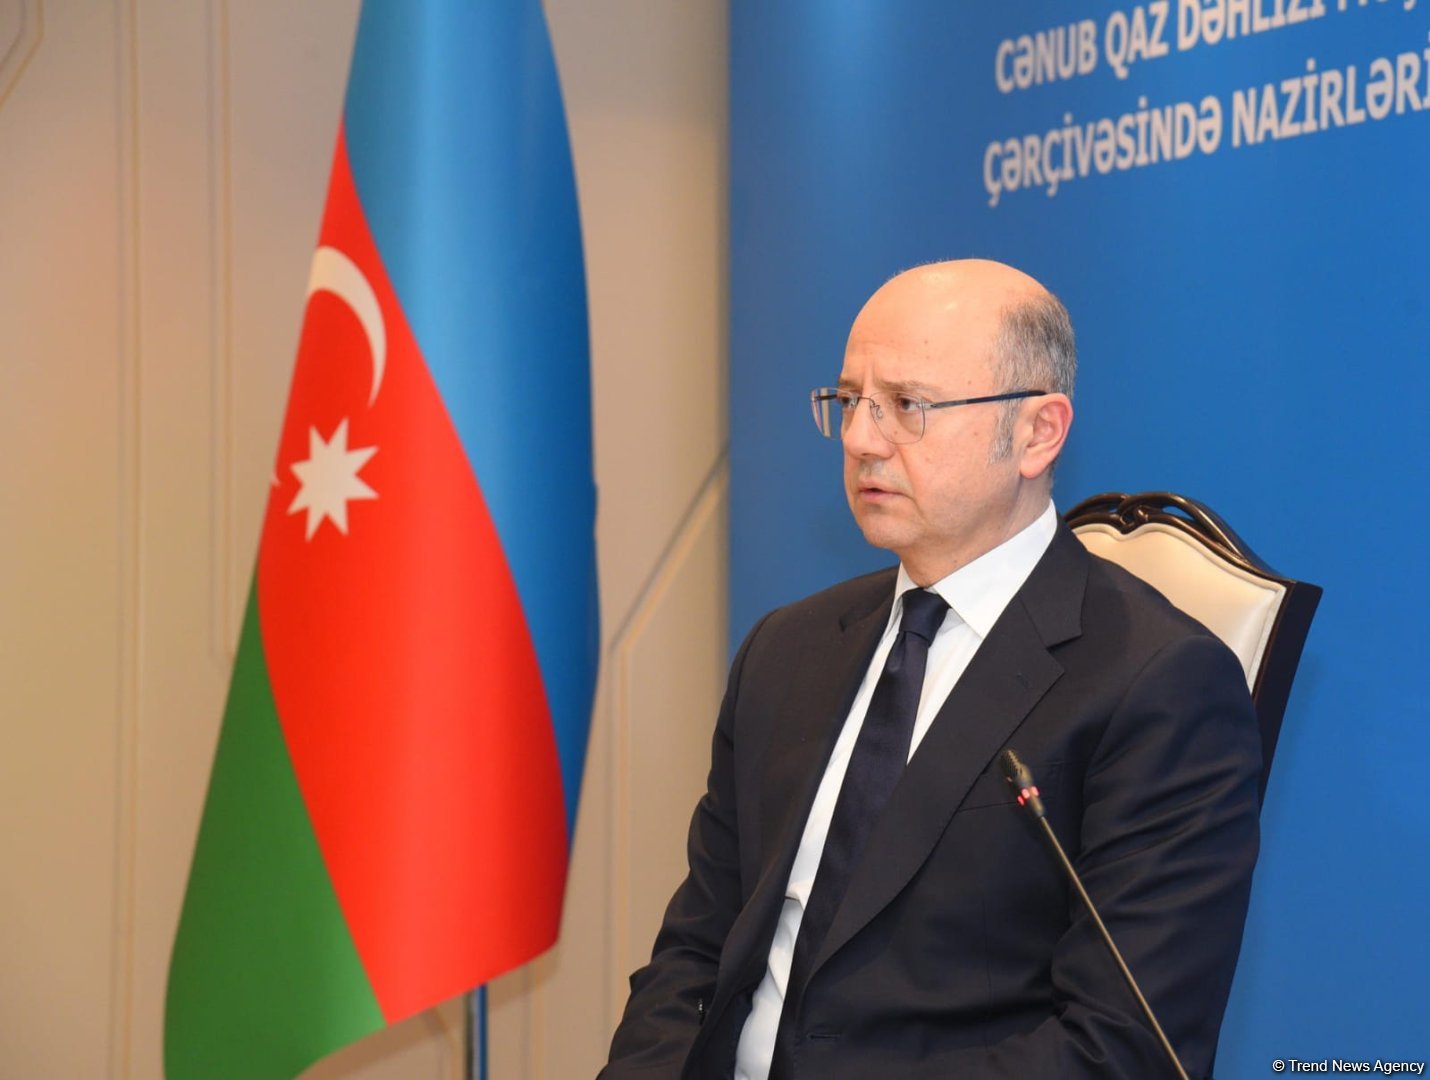 Azerbaijan's gas exports to exceed prior deliverables this year - energy minister